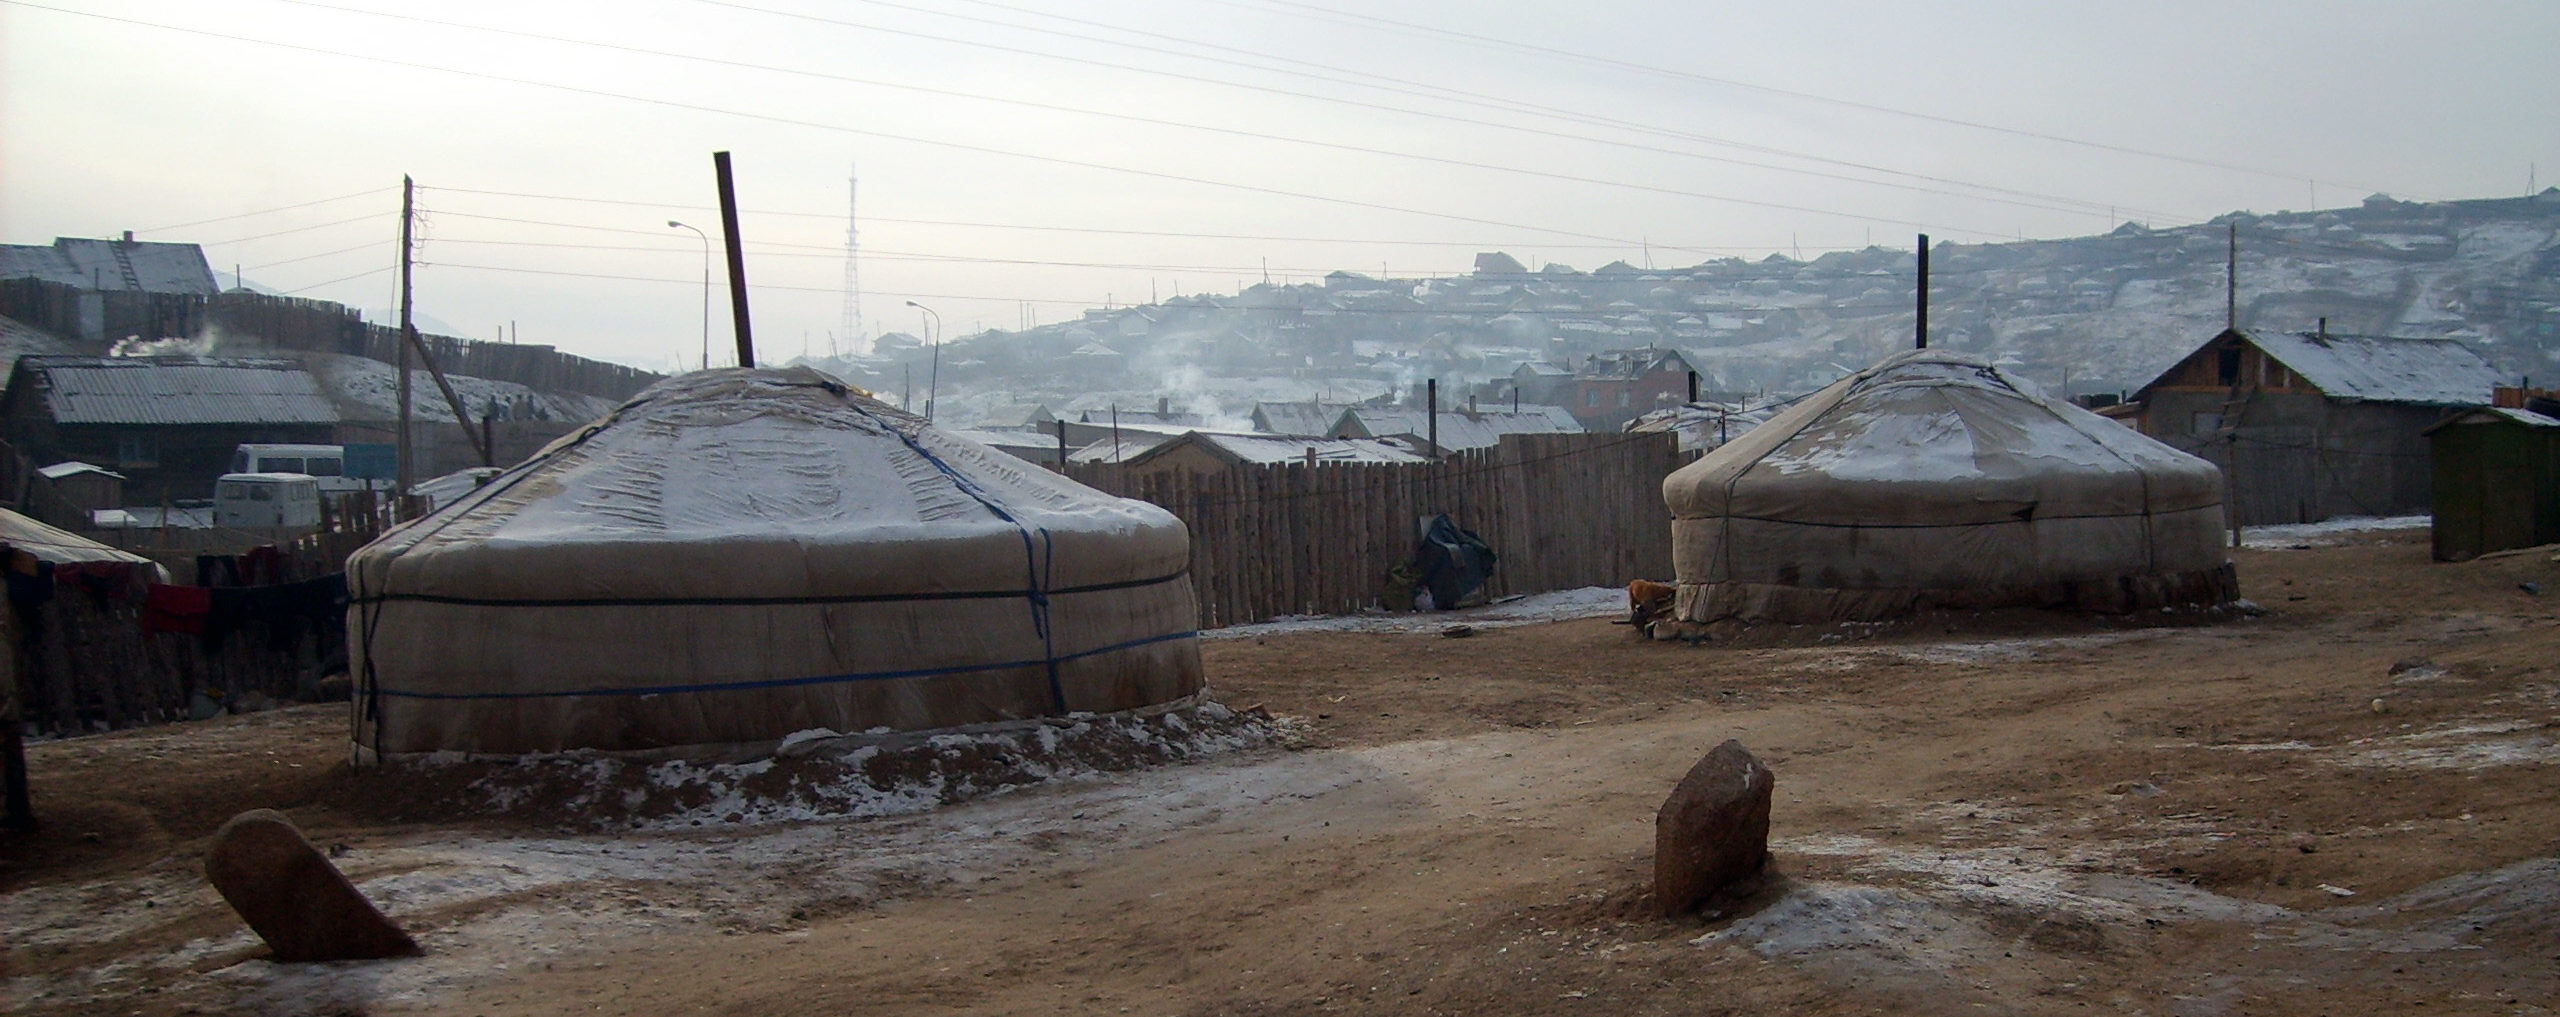 The ger district on the outskirts of Ulaanbaatar.